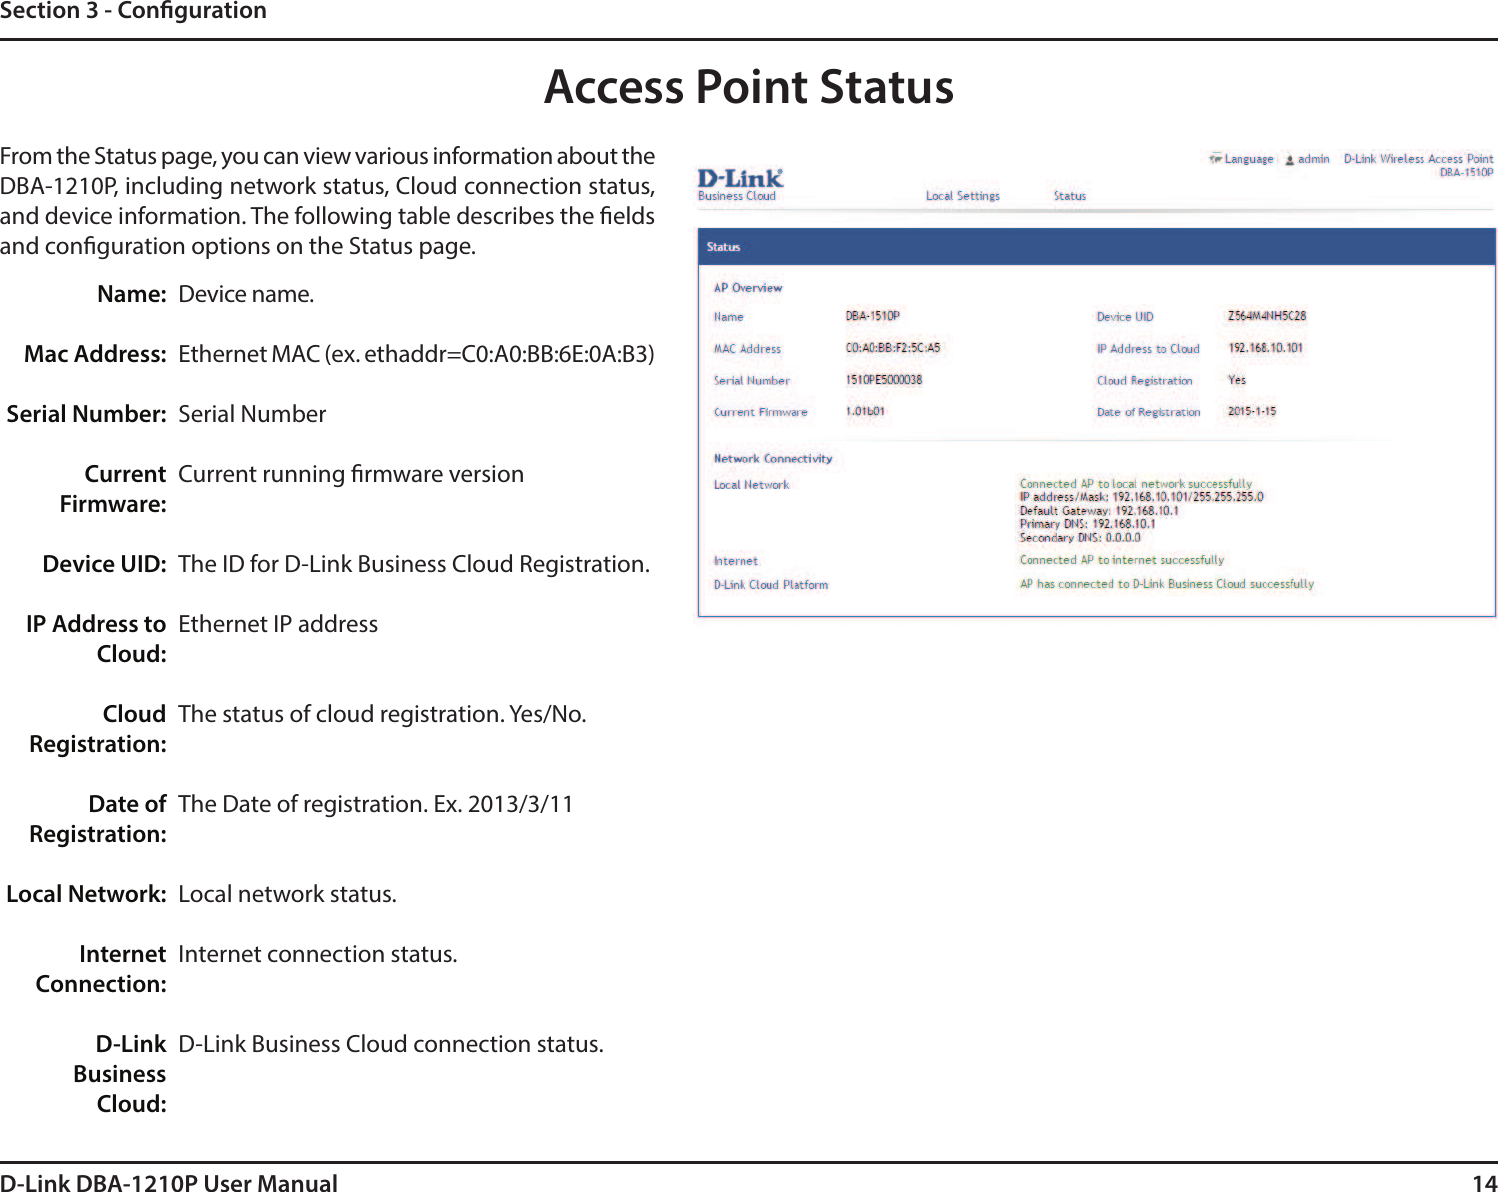 14D-Link DBA-1210P User ManualSection 3 - CongurationAccess Point StatusFrom the Status page, you can view various information about the DBA-1210P, including network status, Cloud connection status, and device information. The following table describes the elds and conguration options on the Status page.Device name.Ethernet MAC (ex. ethaddr=C0:A0:BB:6E:0A:B3)Serial NumberCurrent running rmware versionThe ID for D-Link Business Cloud Registration.Ethernet IP addressThe status of cloud registration. Yes/No.The Date of registration. Ex. 2013/3/11Local network status.Internet connection status.D-Link Business Cloud connection status.Name:Mac Address:Serial Number:Current Firmware:Device UID:IP Address to Cloud:Cloud Registration:Date of Registration:Local Network:Internet Connection:D-Link BusinessCloud: